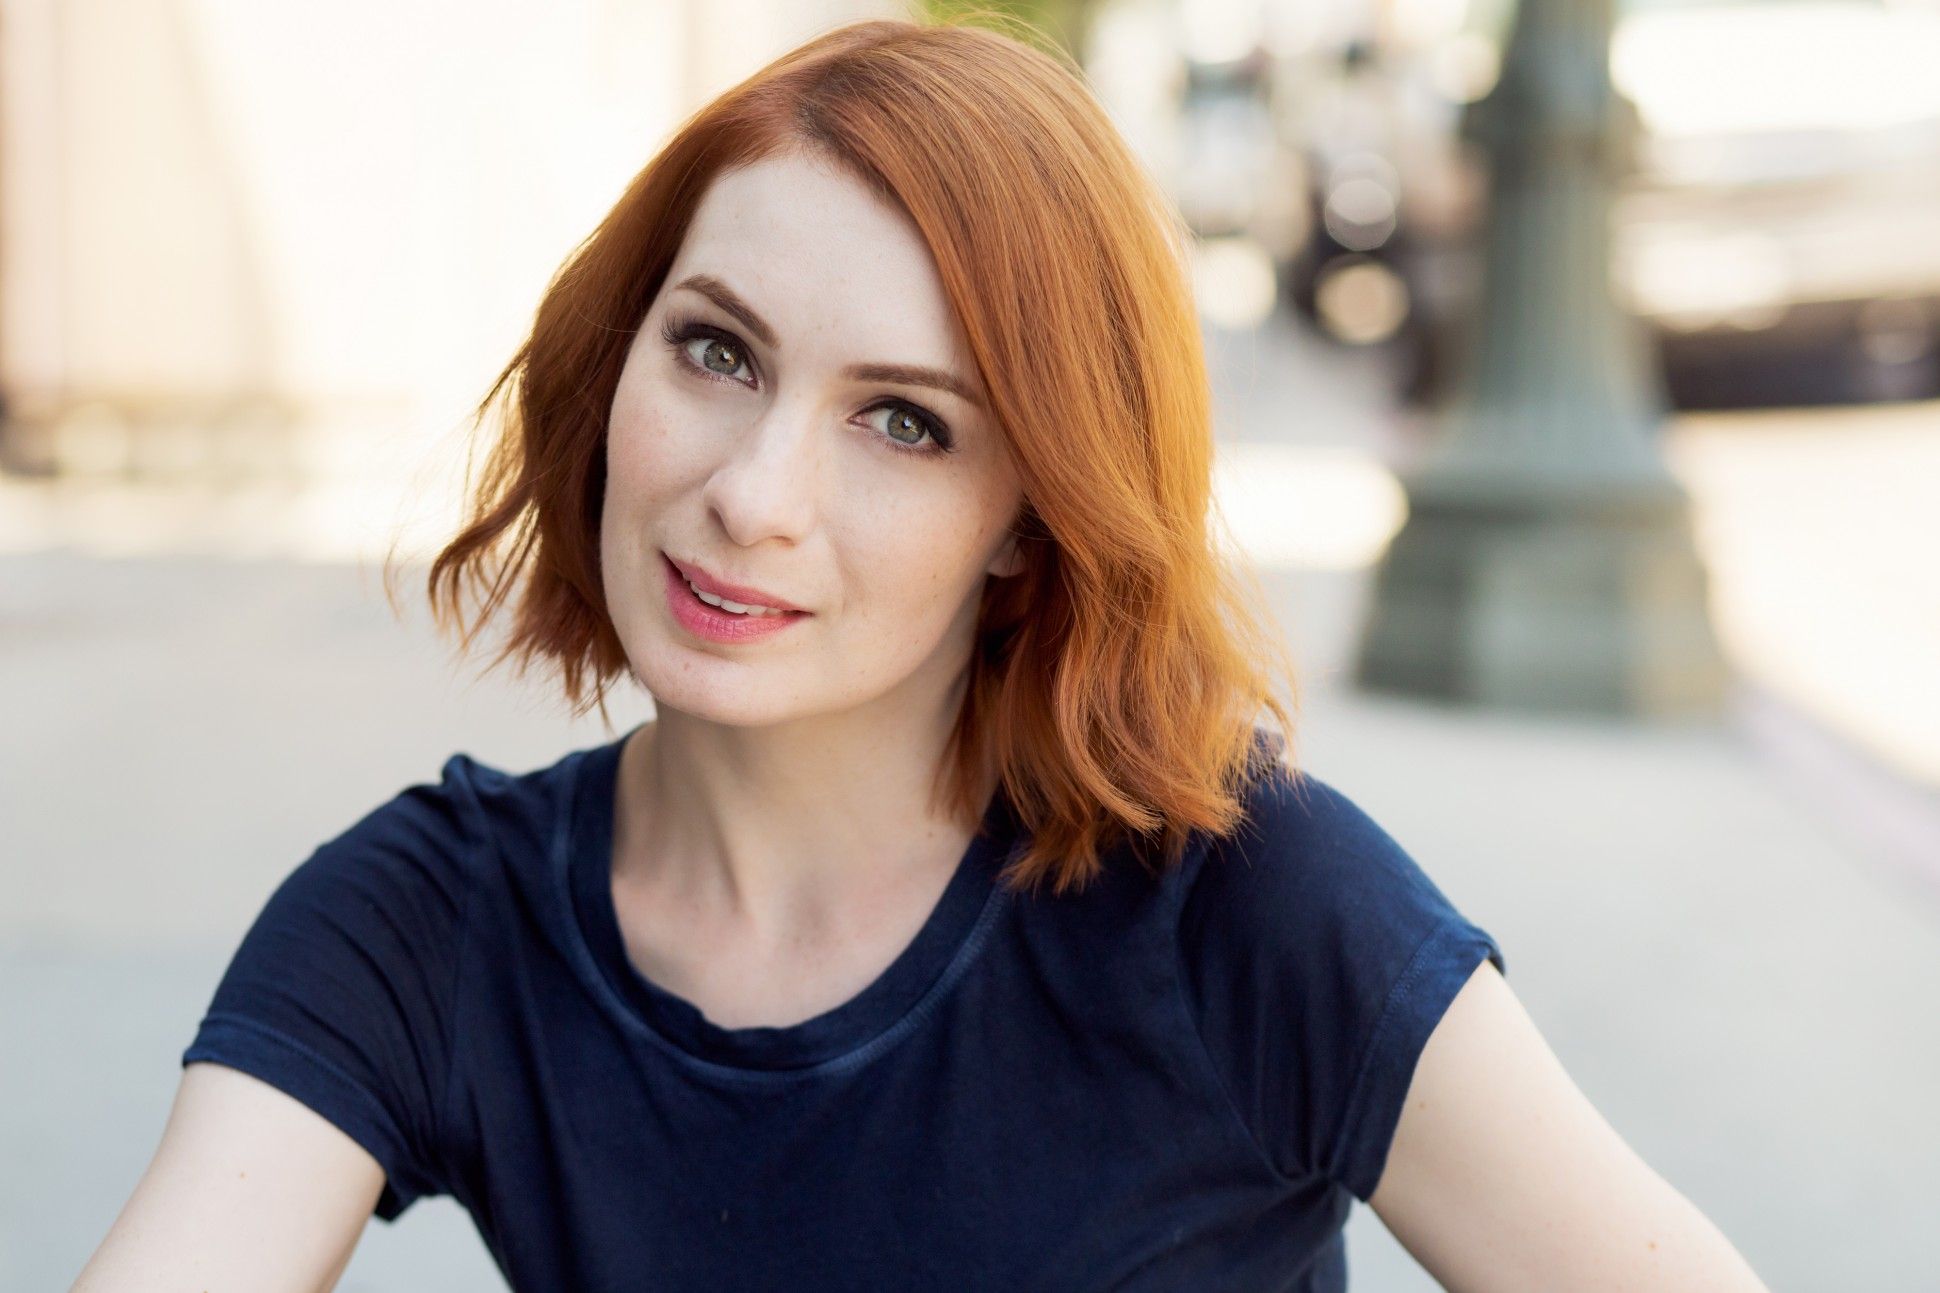 Pictures Of Felicia Day